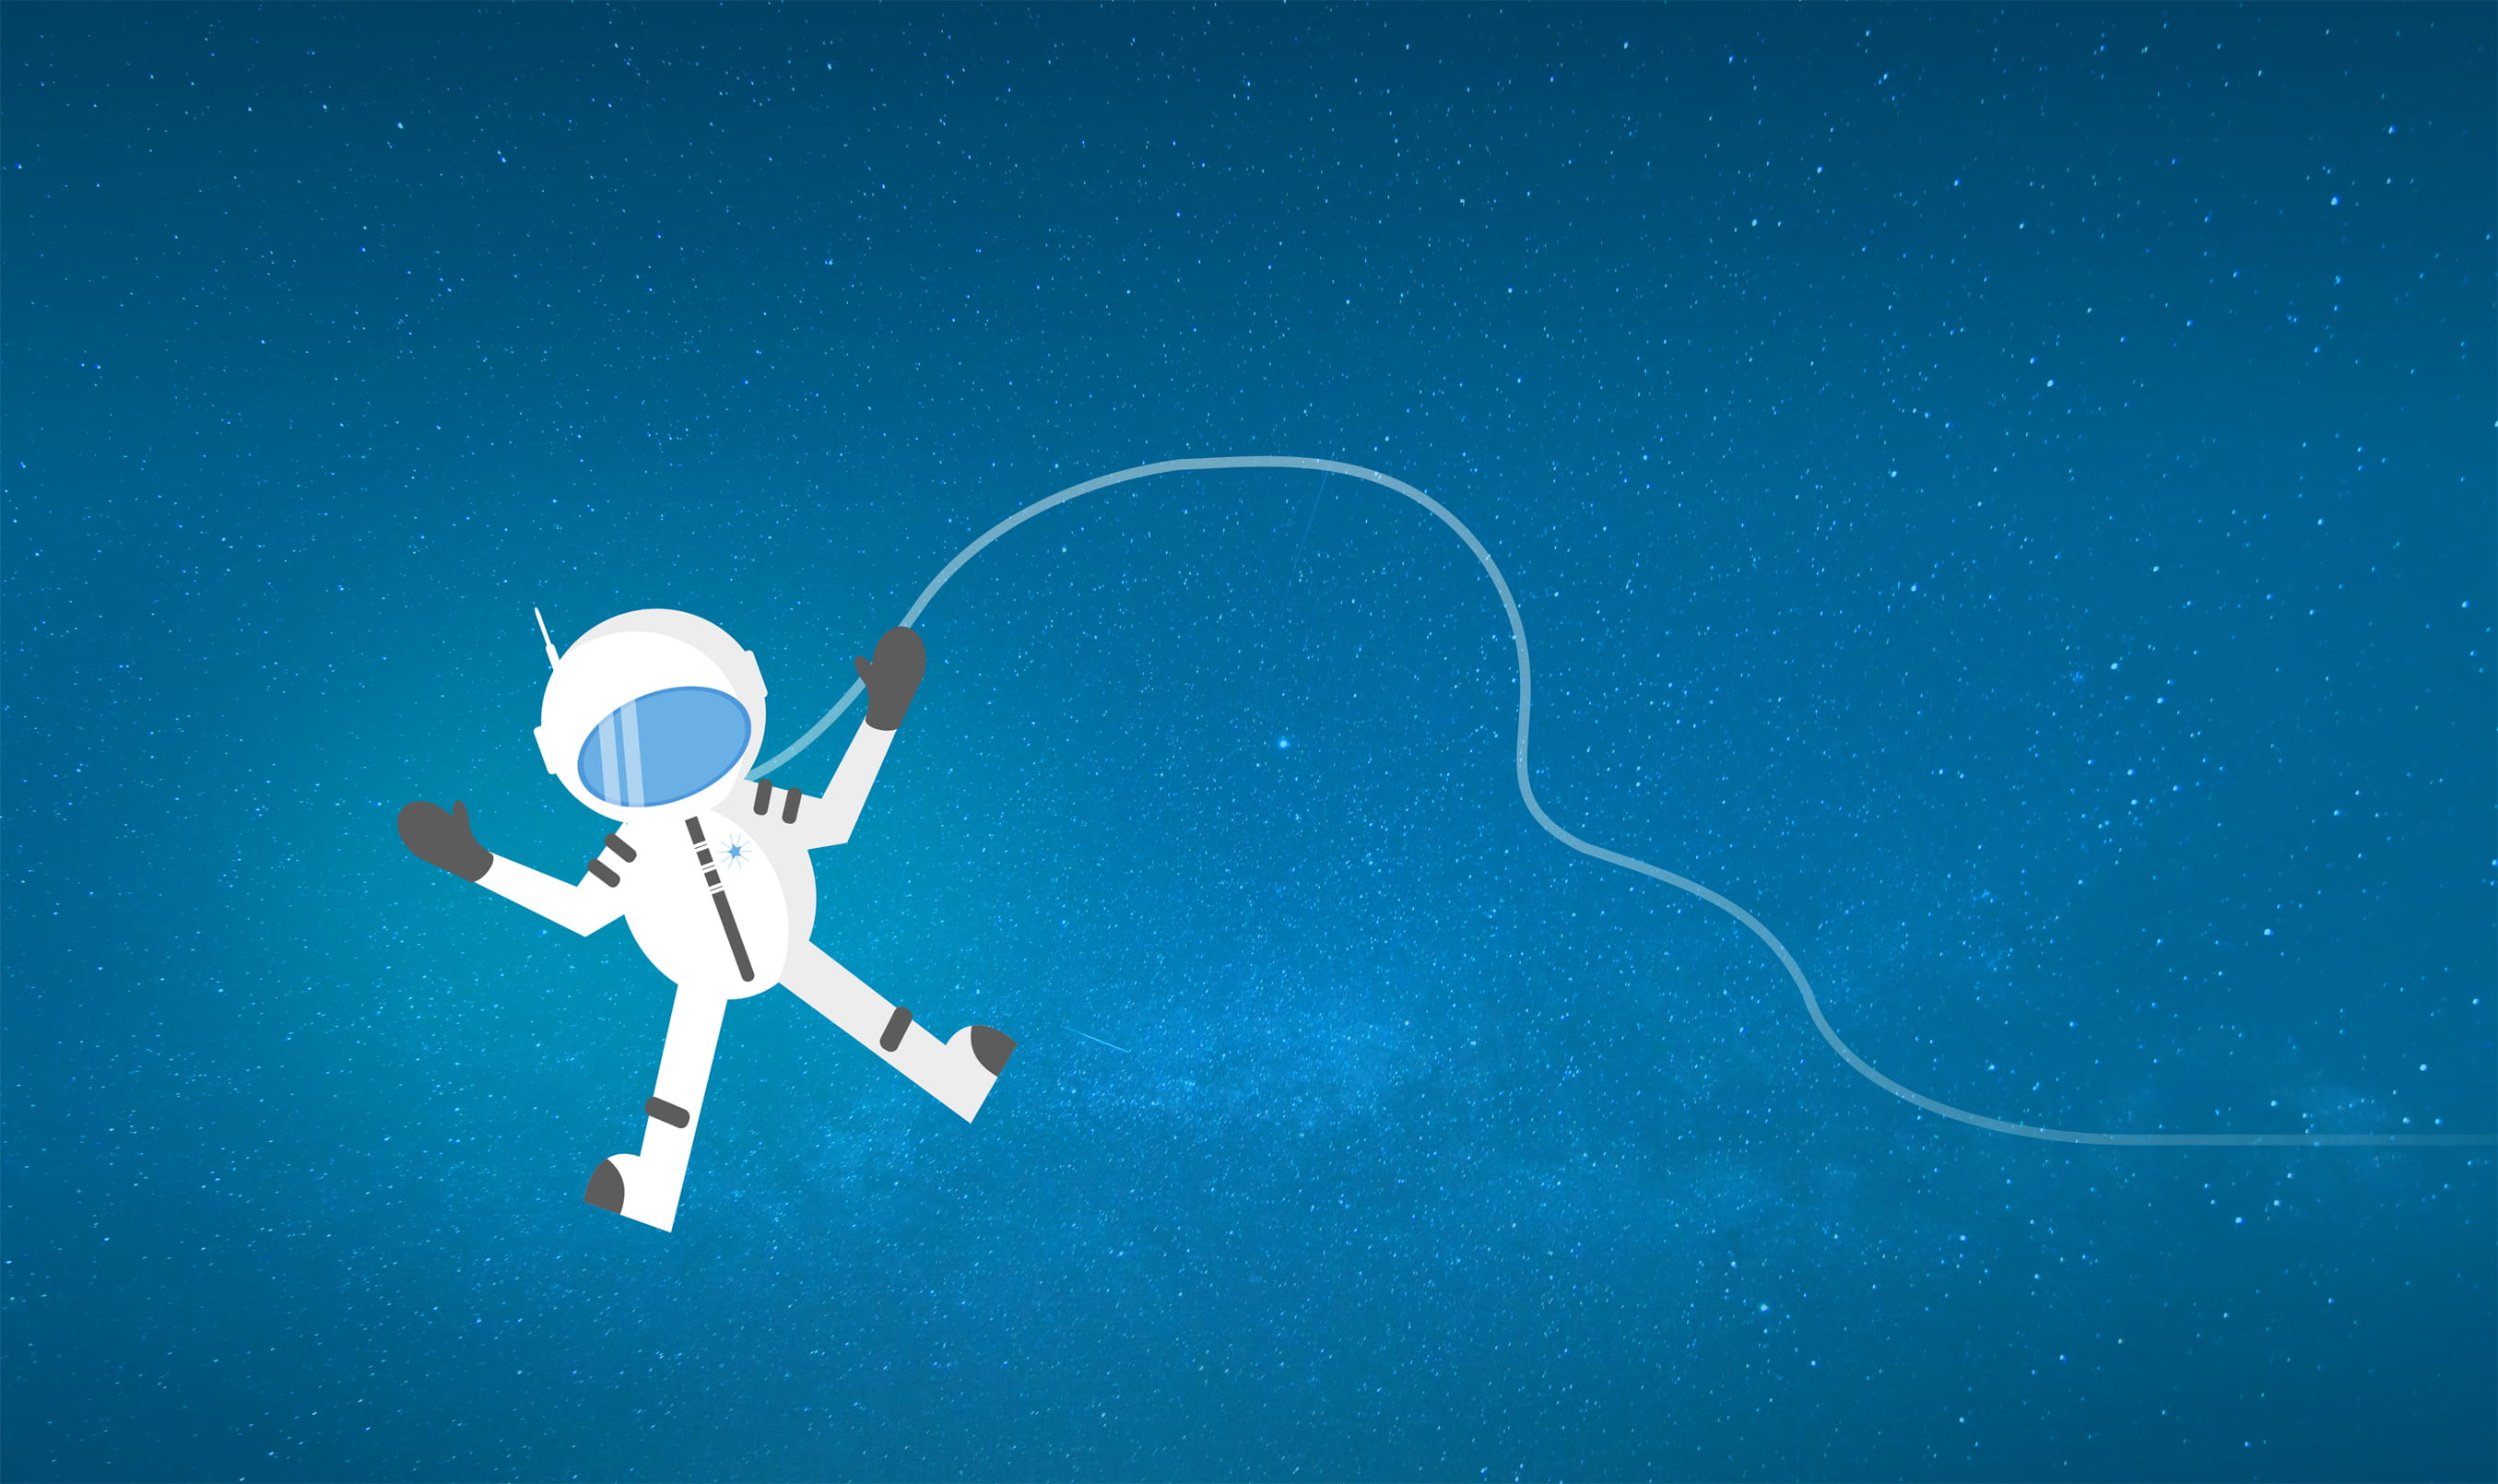 Cartoon Astronaut Drifting and Lost in Space - With Copyspace